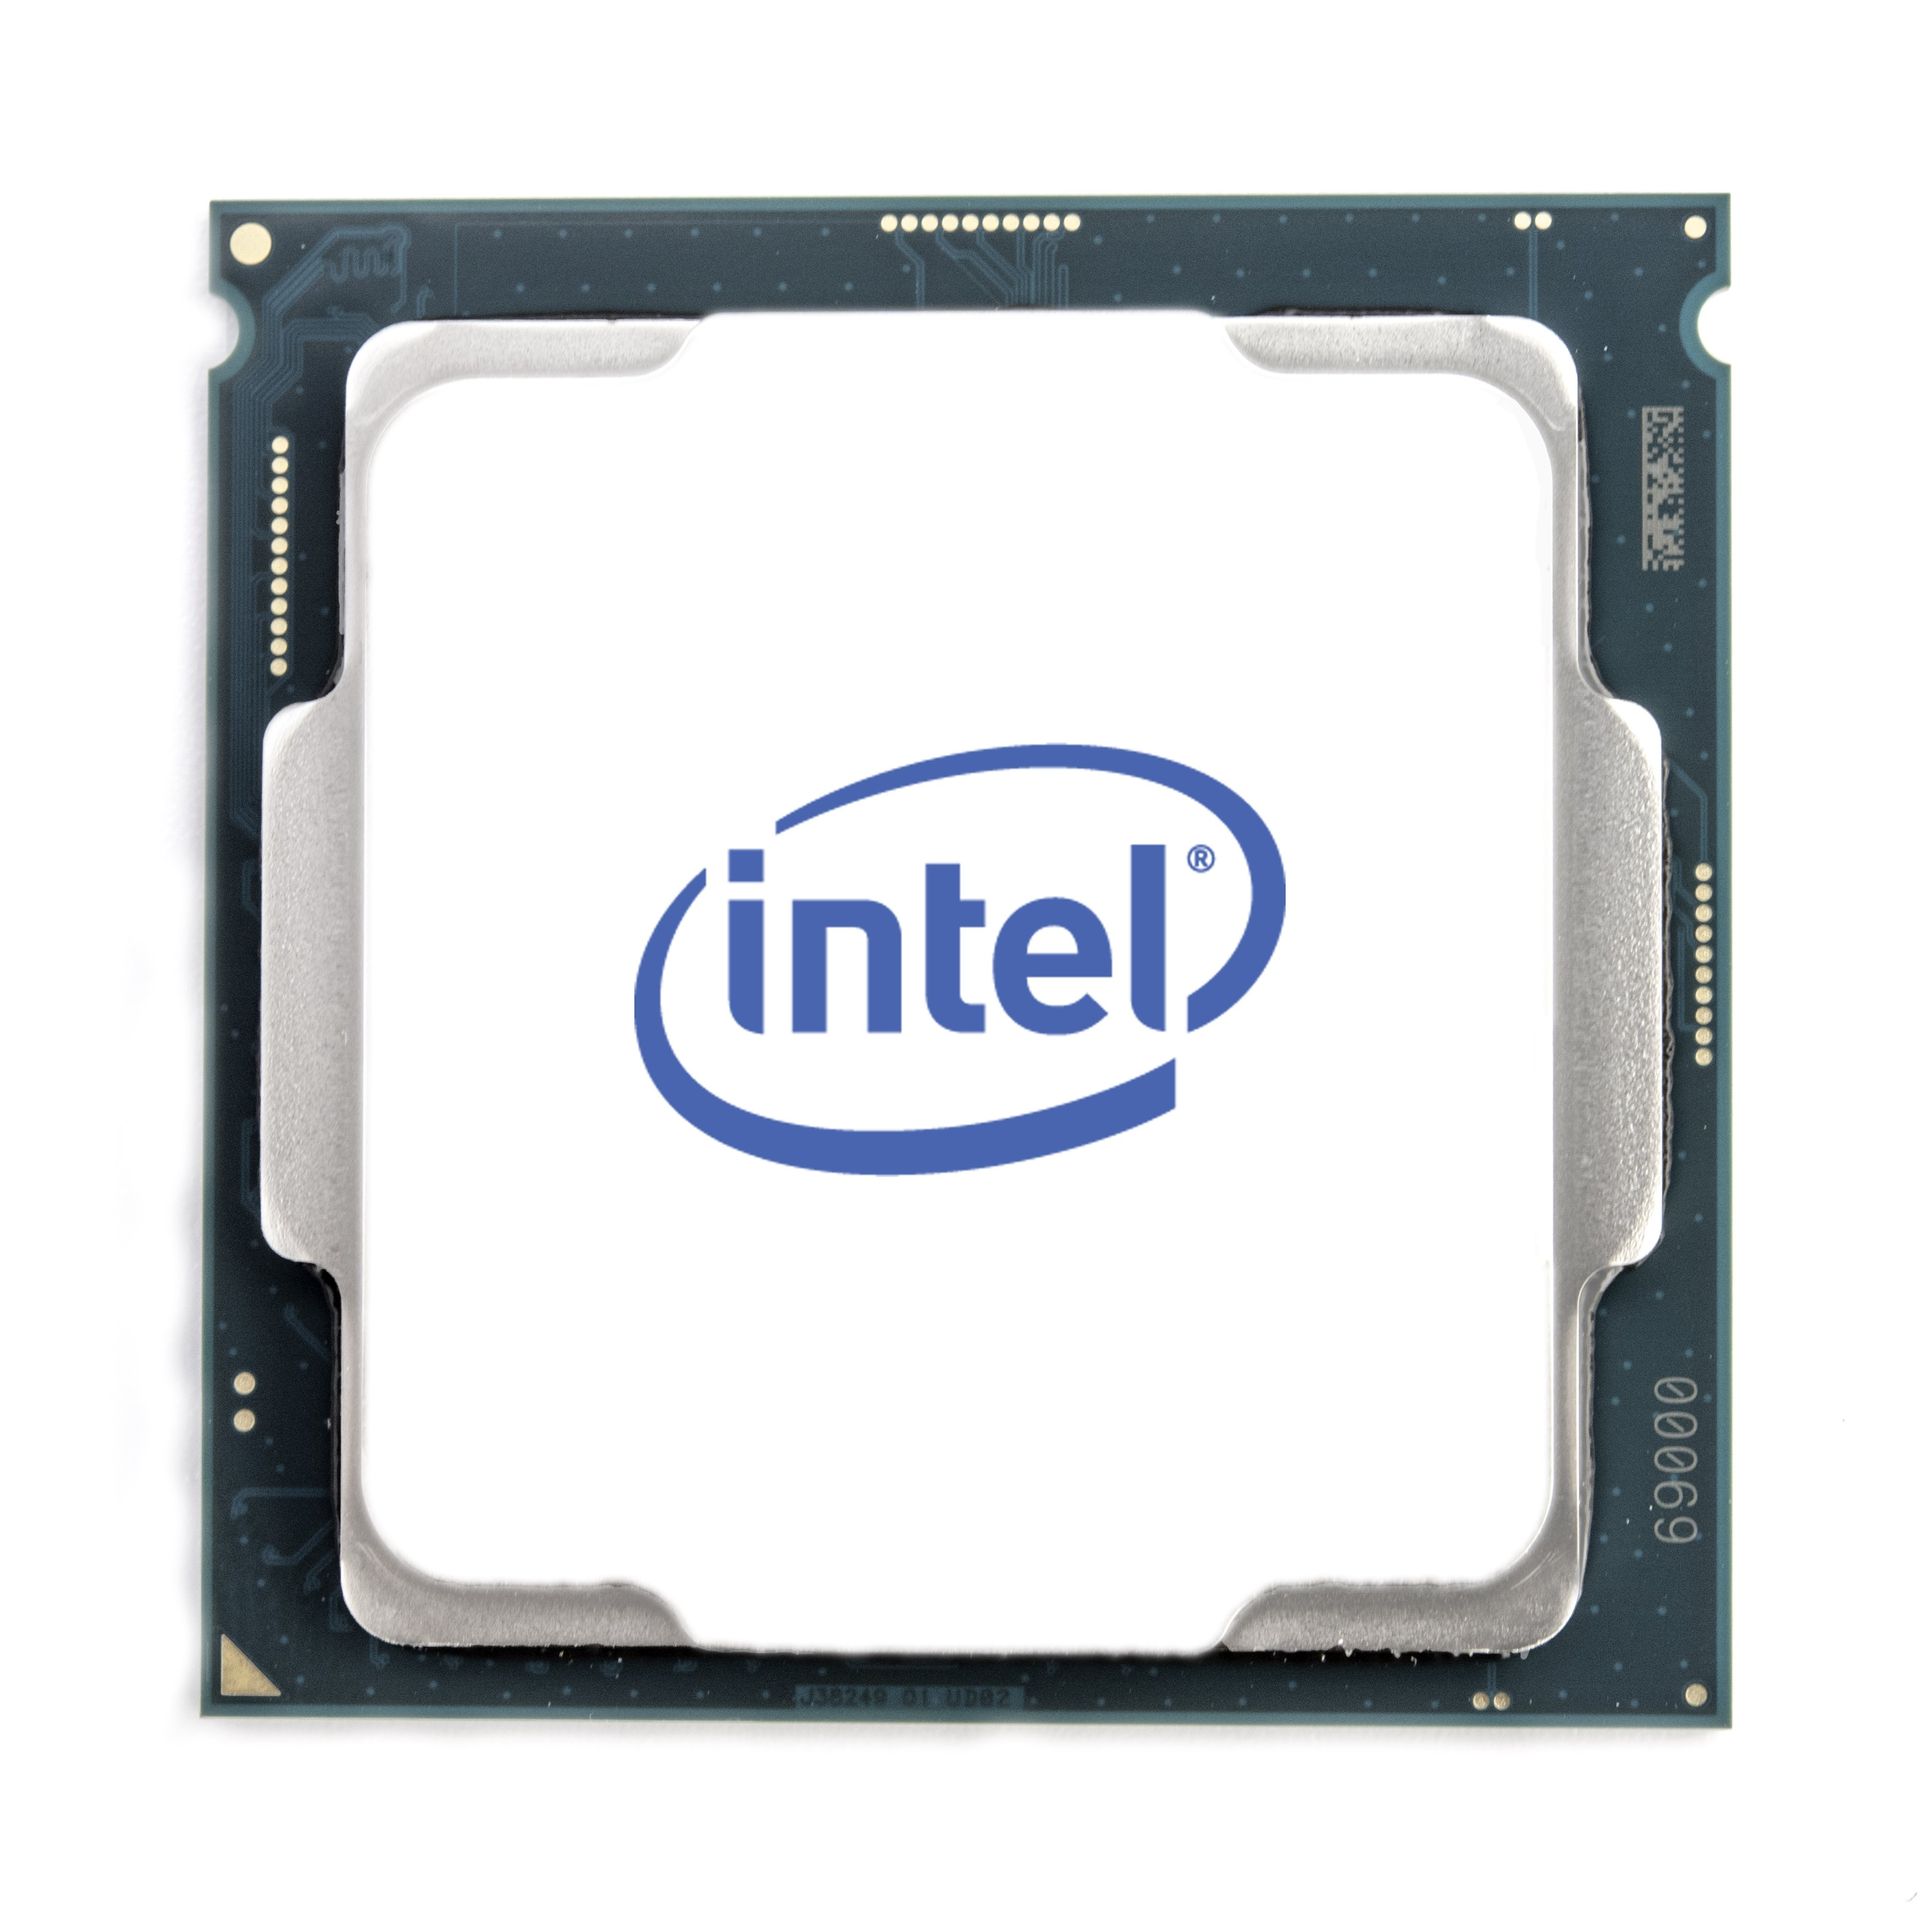 Intel Xeon-Gold 5315Y 3.2GHz 8-core 140W Processor for HPE P36930-B21